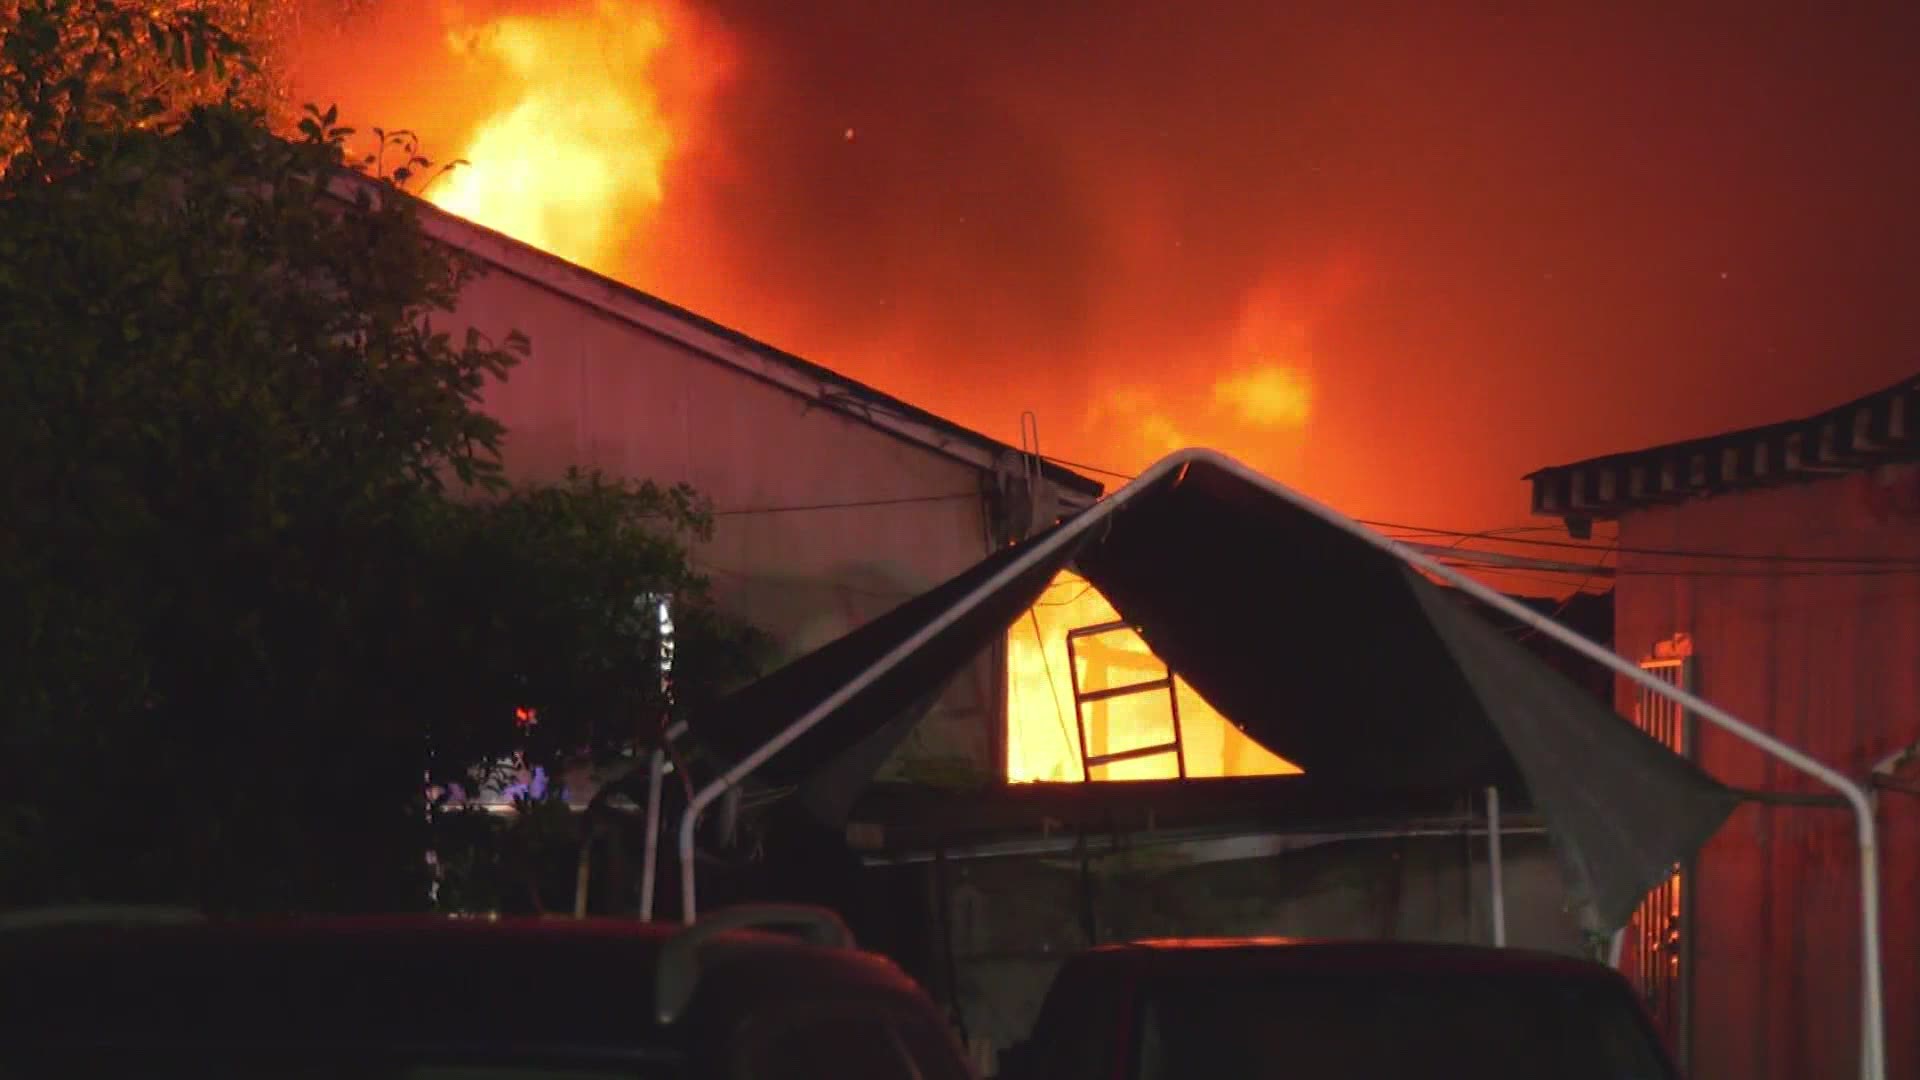 KHOU 11's Janel Forte reports that four of the buildings are a complete loss.